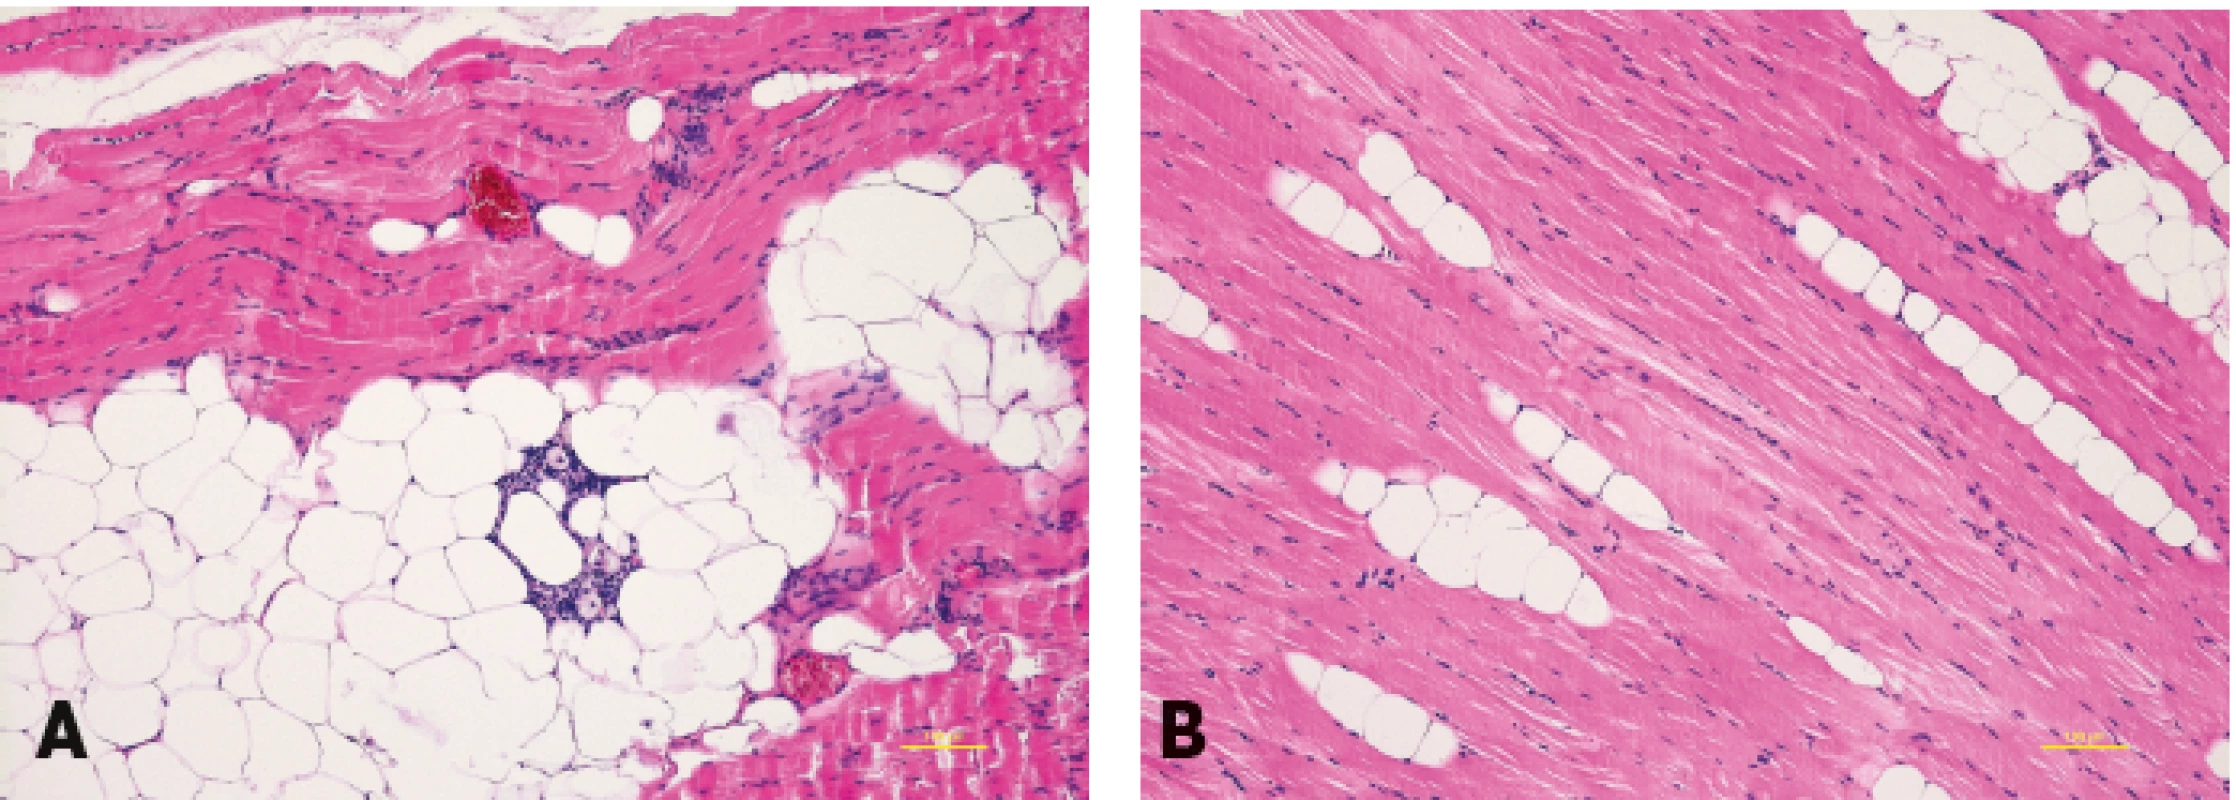 Histological examination of the muscles: (a) the pectoralis muscle after fat grafting with lipomatous changes, (b) the serratus anterior muscle - the control sample from the same patient (without fat grafting). Haematoxylin eosin staining. Scale bar 100 mm.